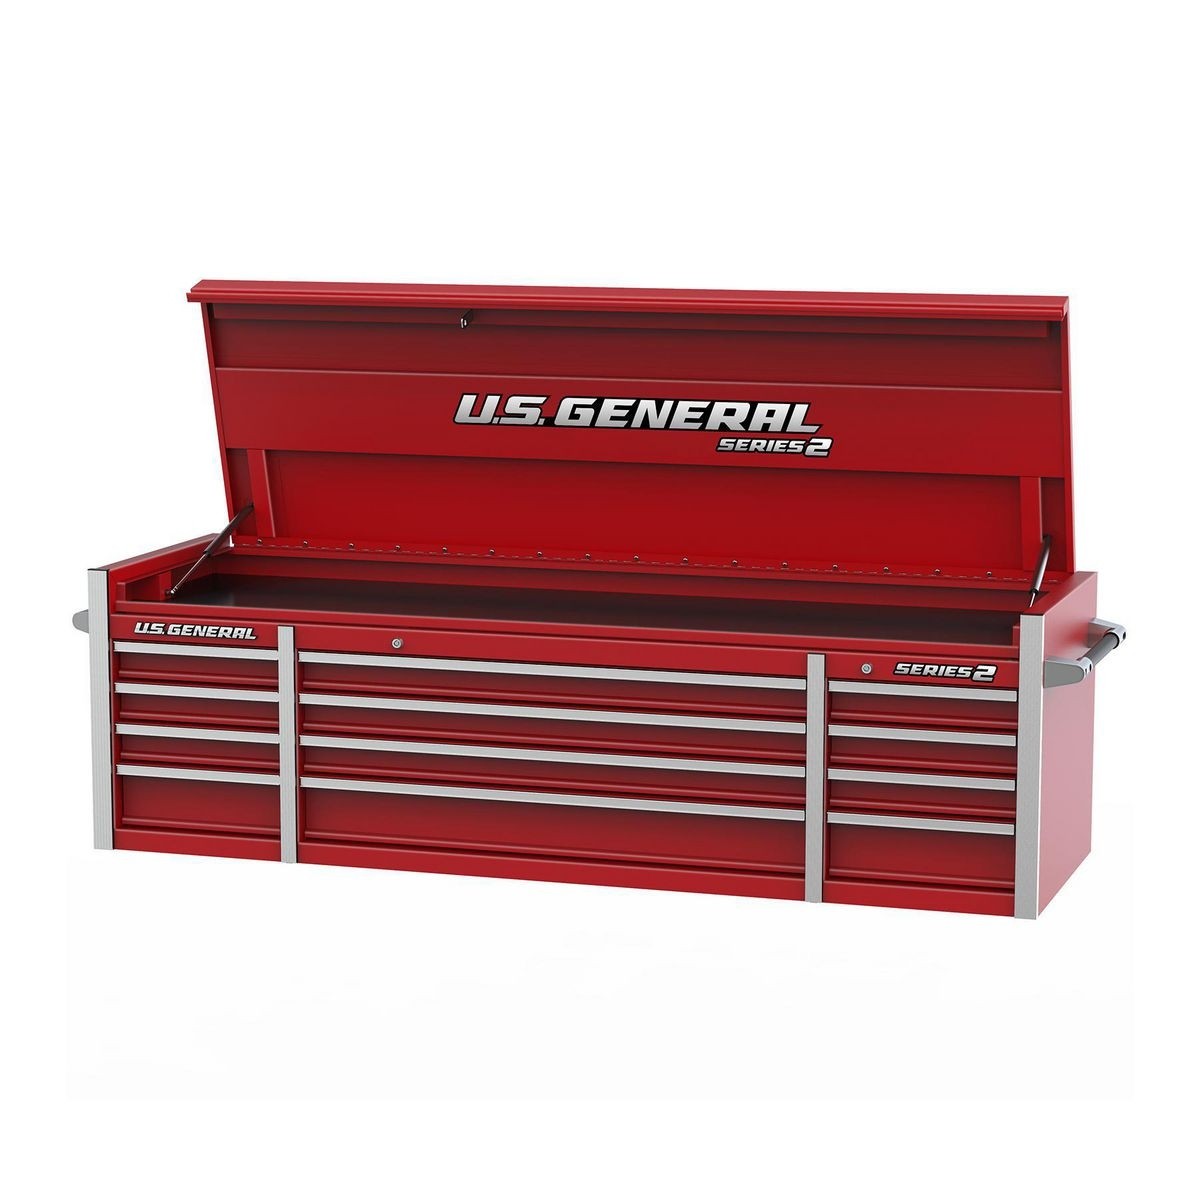 U.S. GENERAL 72 In. Triple Bank Top Chest - Red – Item 57540